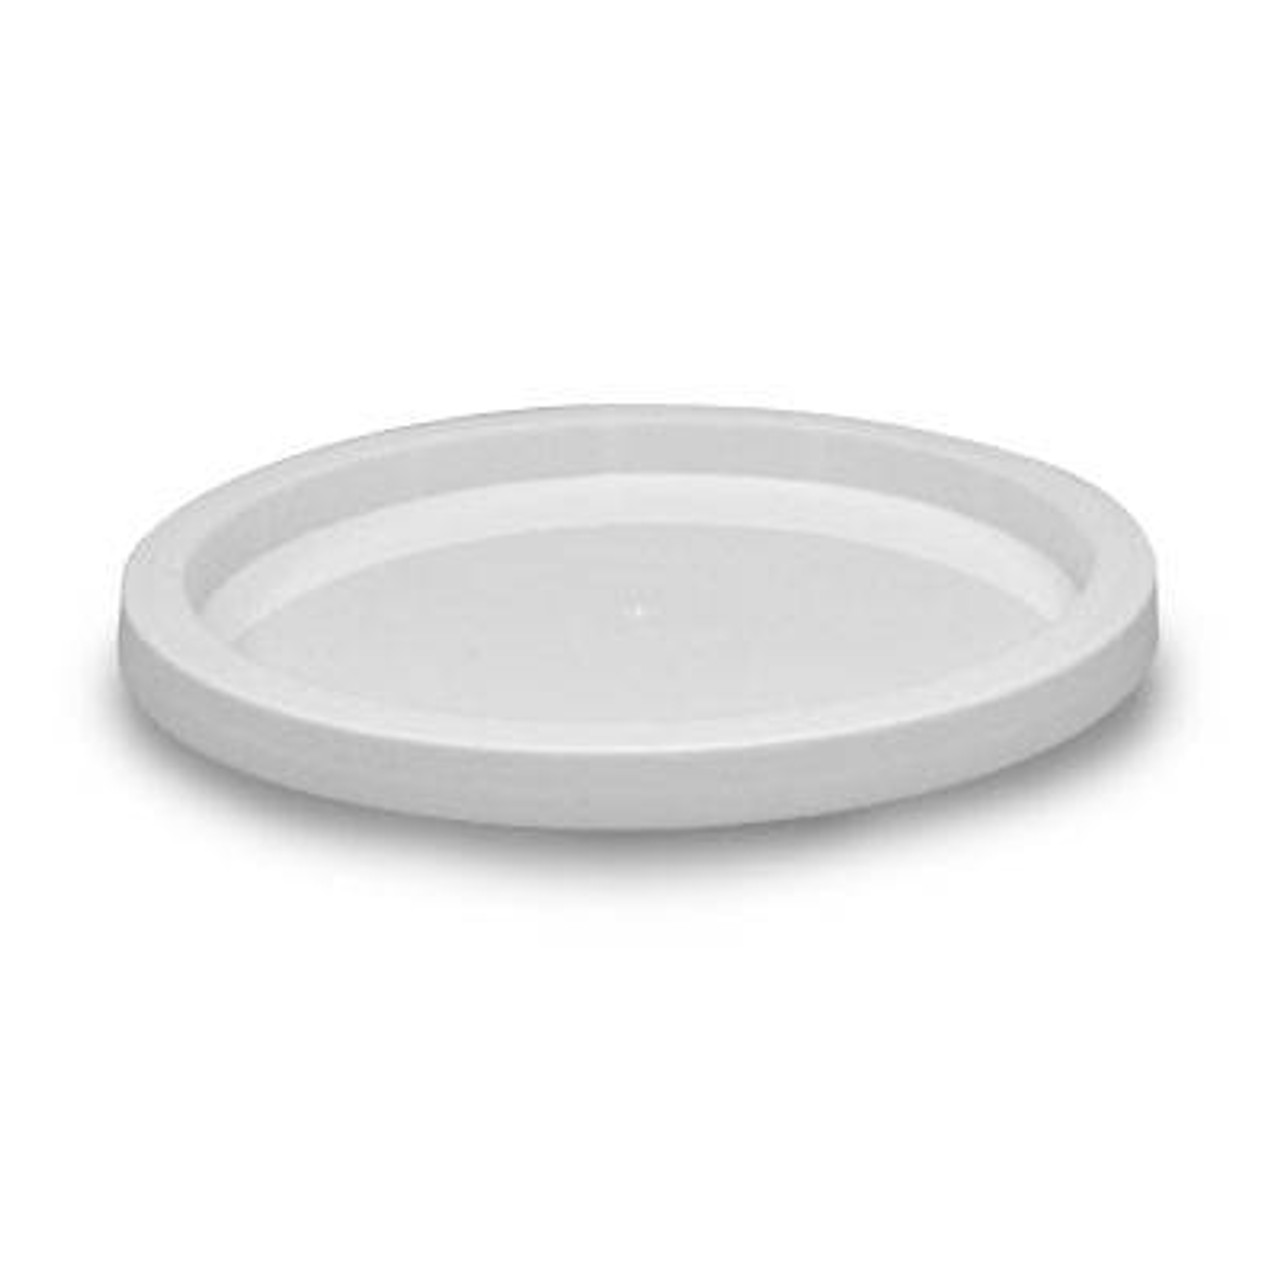 8 oz. BPA Free Food Grade Round Container (T41008CP) - 1000 count - case